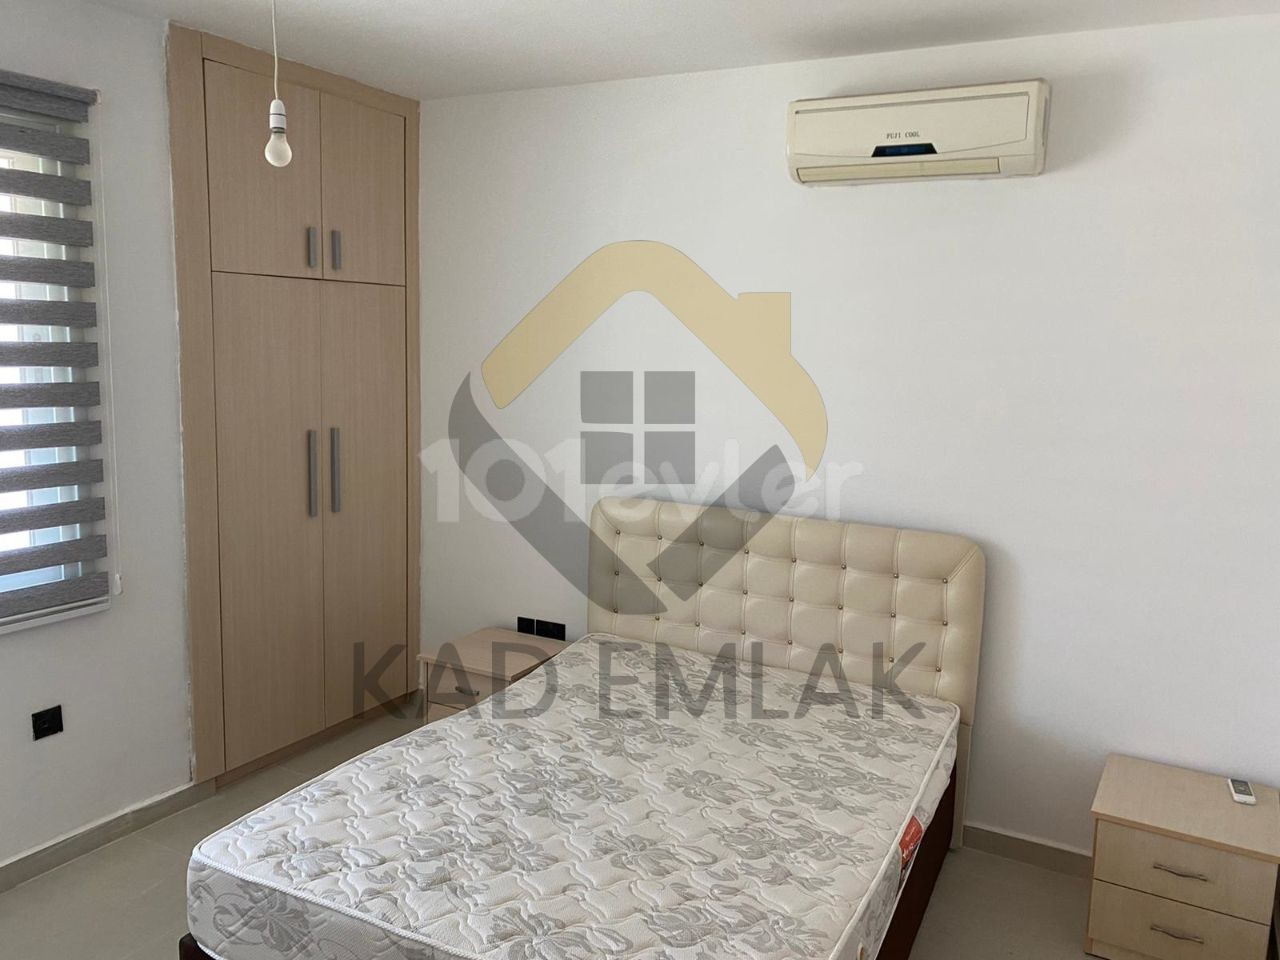 3 + 1 Ground Floor Furnished Apartment for Sale in Kyrenia Dogankoy ** 